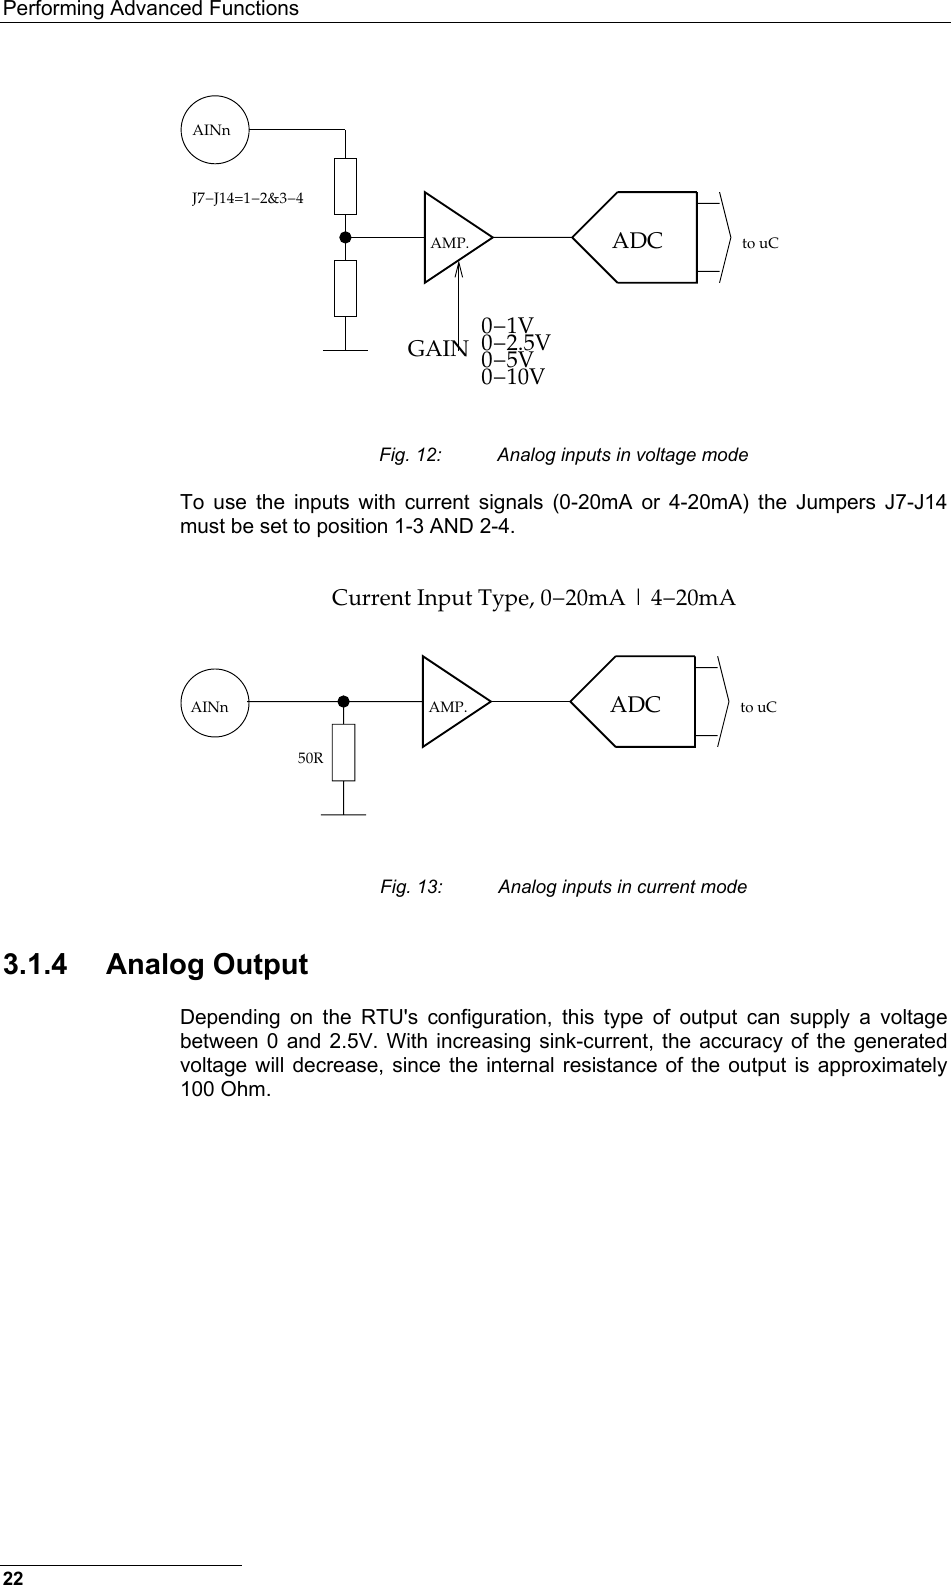 Performing Advanced Functions  AMP.GAIN 0−1V0−2.5V0−5V0−10VADCto uCAINnJ7−J14=1−2&amp;3−4  Fig. 12:  Analog inputs in voltage mode To use the inputs with current signals (0-20mA or 4-20mA) the Jumpers J7-J14 must be set to position 1-3 AND 2-4.  AMP. ADC to uC50RCurrent Input Type, 0−20mA | 4−20mAAINn  Fig. 13:  Analog inputs in current mode 3.1.4 Analog Output Depending on the RTU&apos;s configuration, this type of output can supply a voltage between 0 and 2.5V. With increasing sink-current, the accuracy of the generated voltage will decrease, since the internal resistance of the output is approximately 100 Ohm.  22 